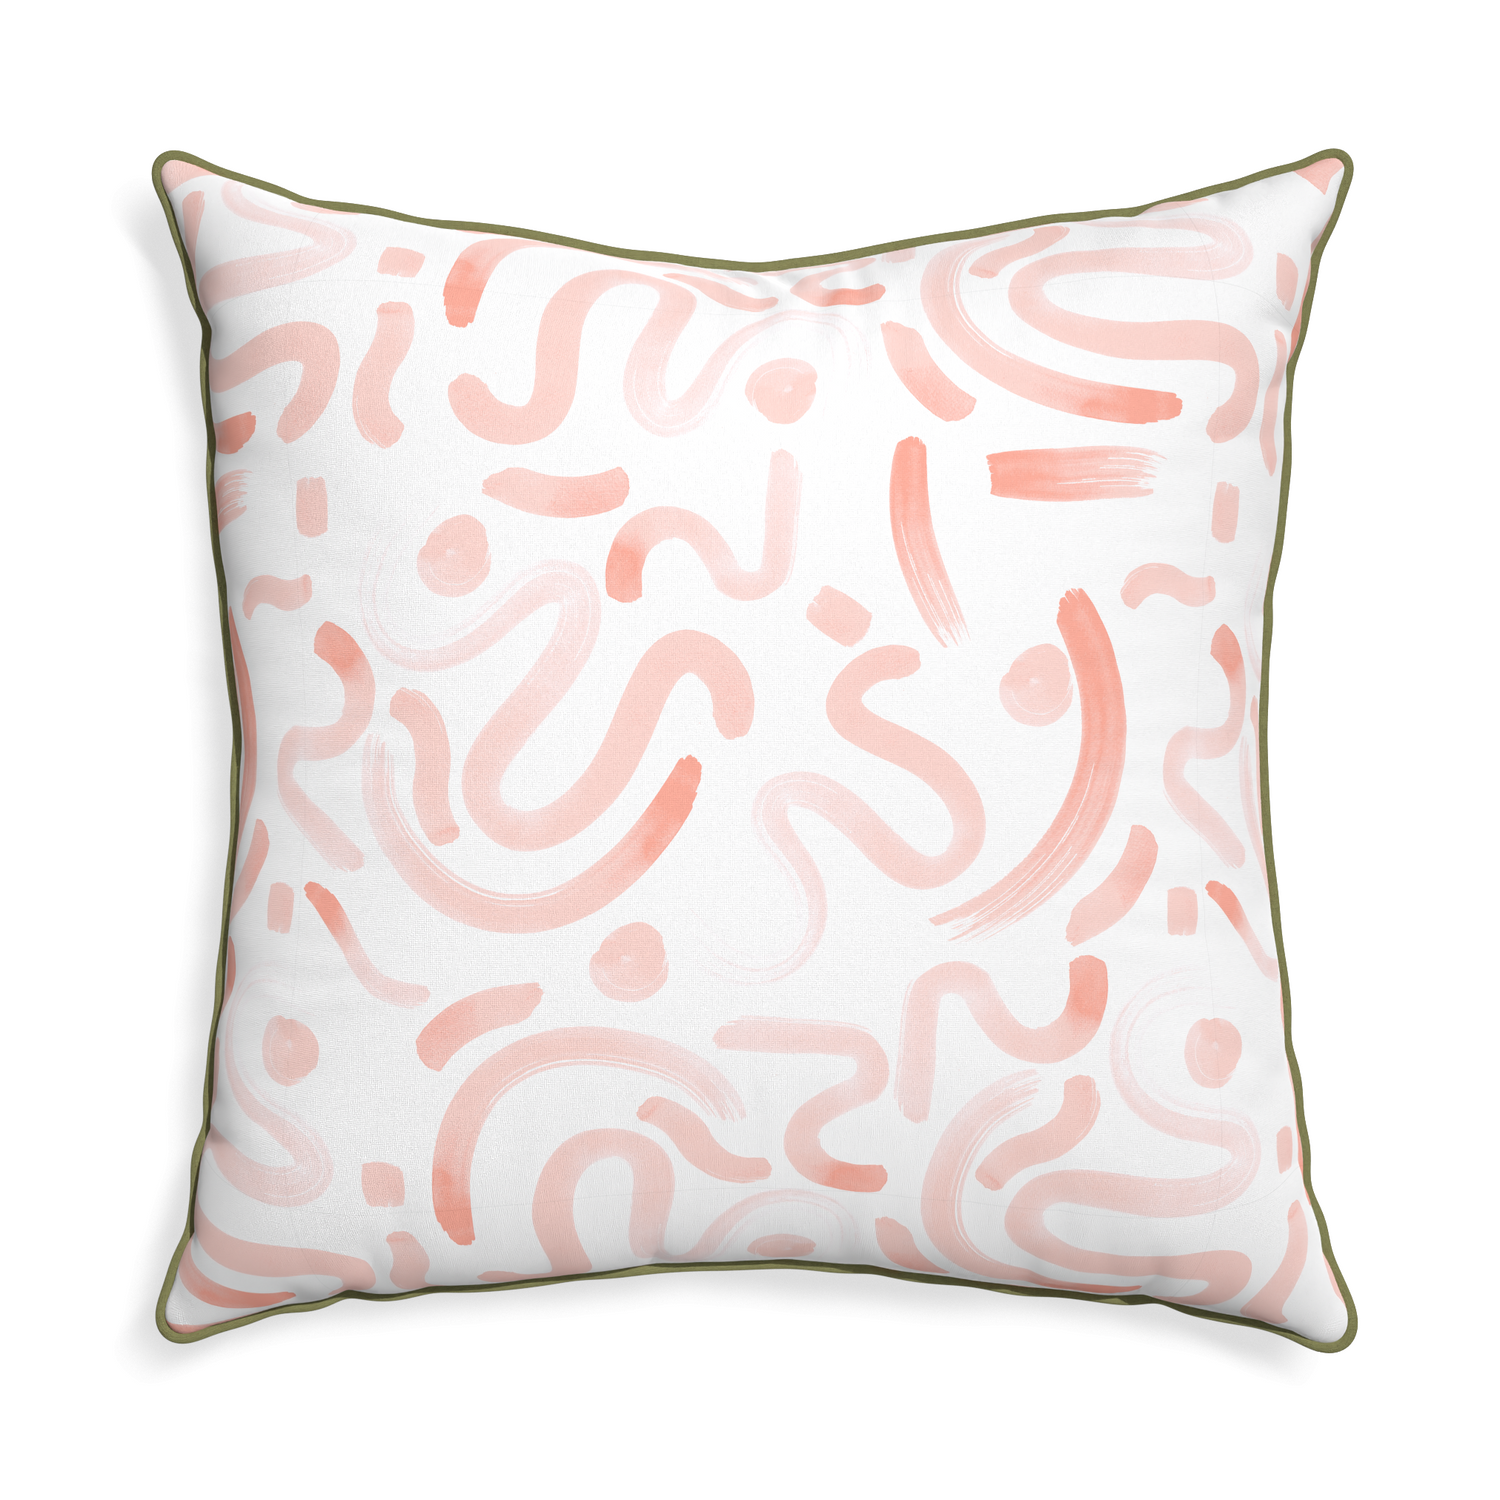 Euro-sham hockney pink custom pink graphicpillow with moss piping on white background